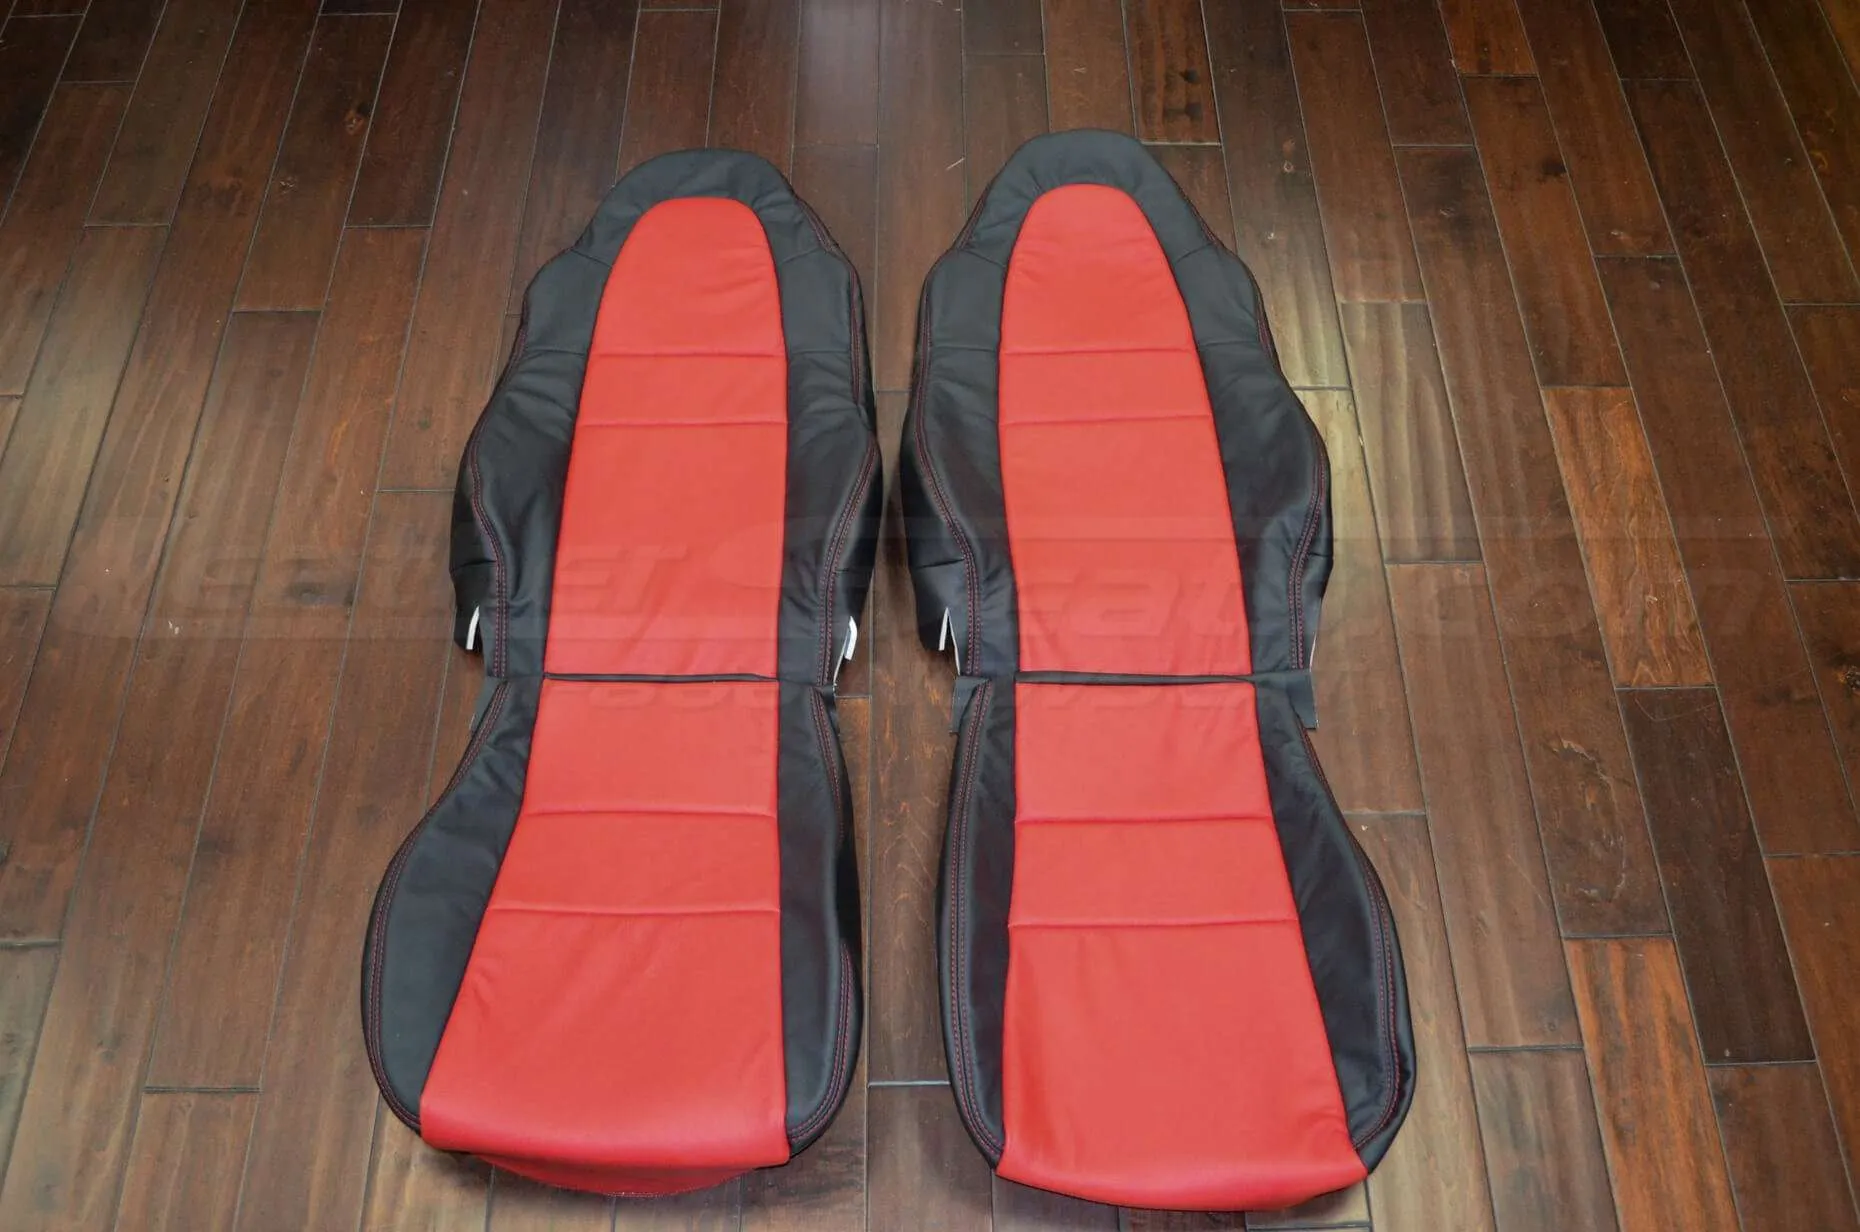 Toyota MR-2 leather seats - Black & Red - Front seat upholstery kit